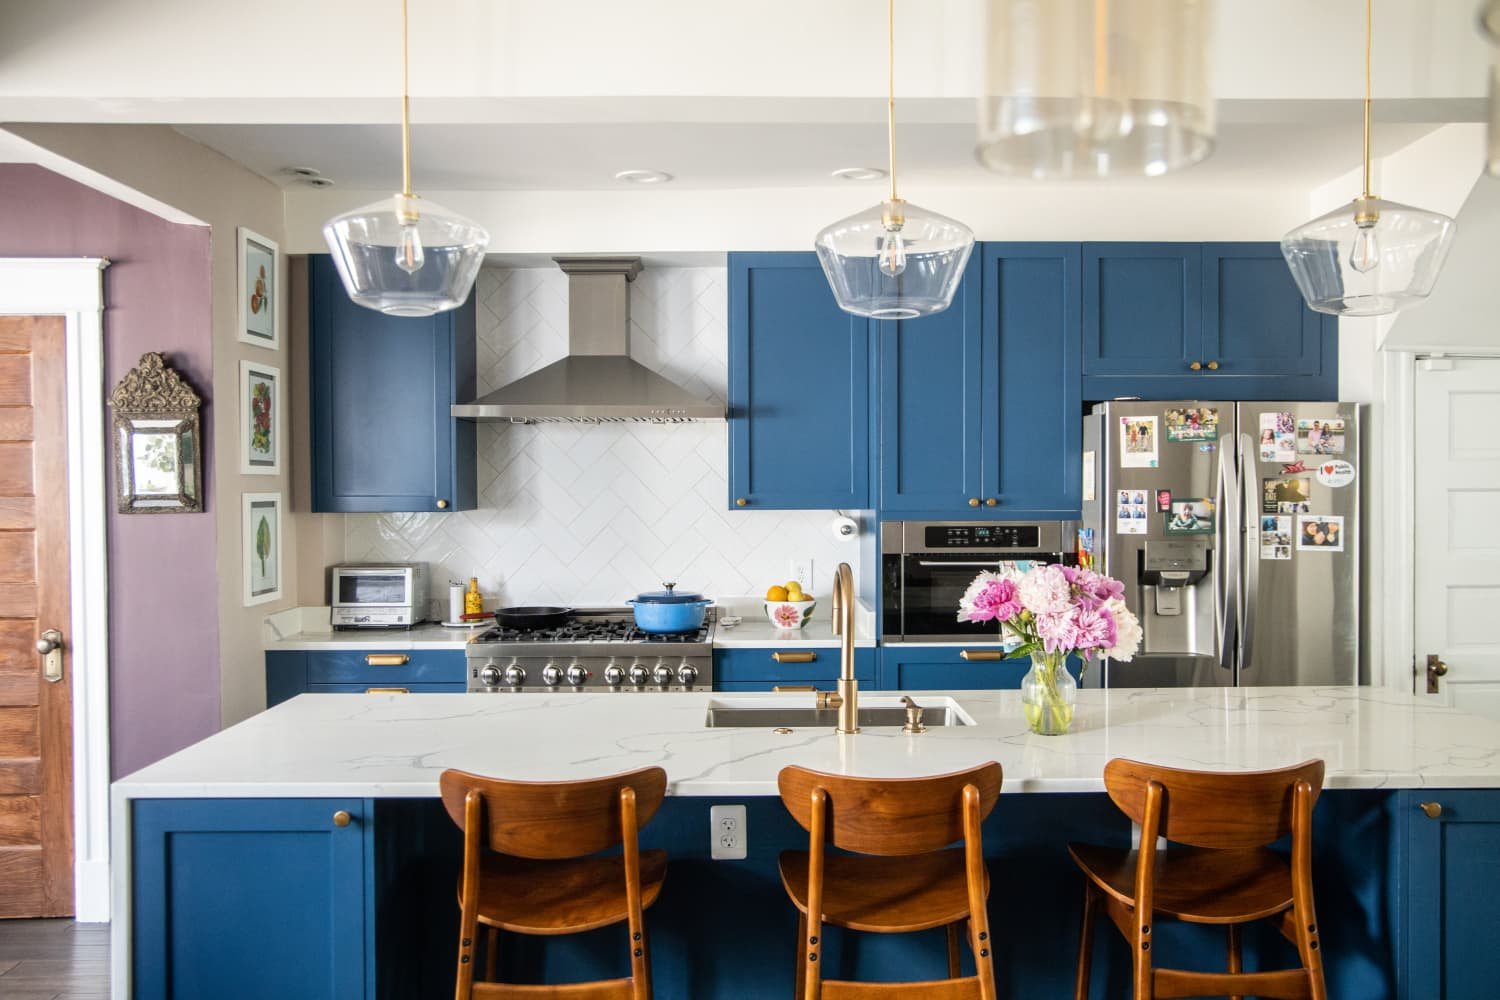 This Kitchen Renovation Cost $27,501 — Here’s Where Every Penny Went